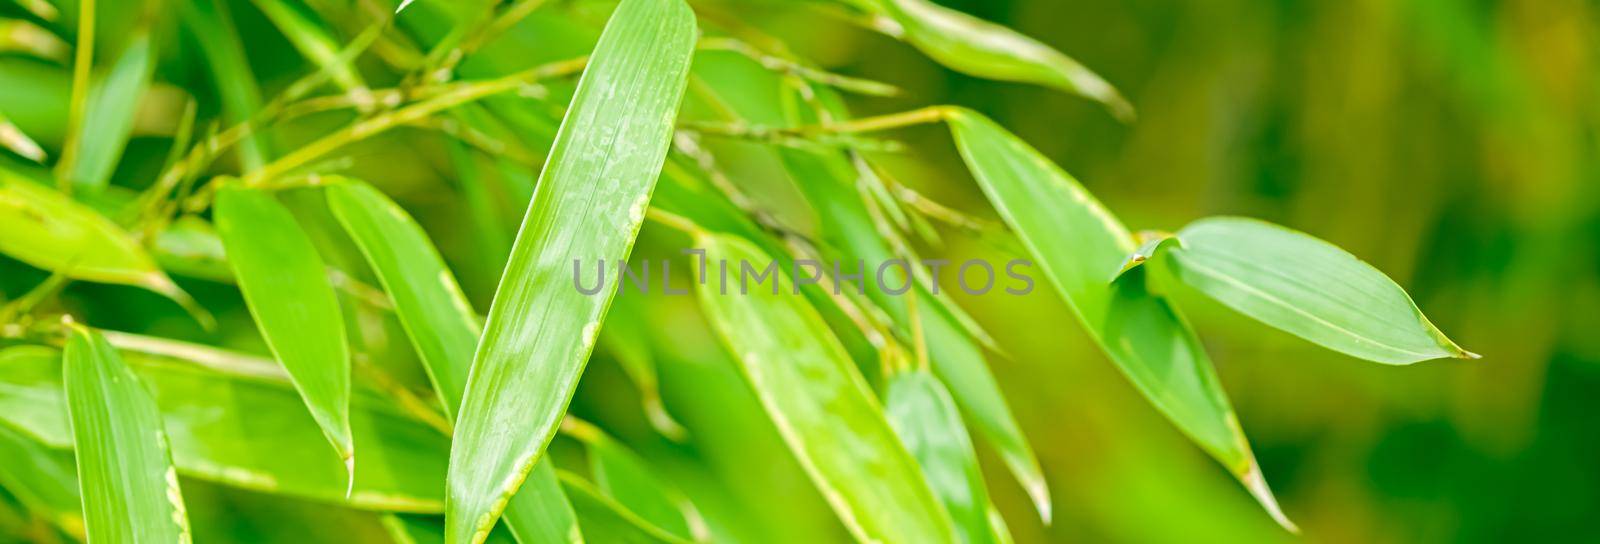 Green bamboo background, fresh leaves on tree as nature, ecology and environment concept by Anneleven